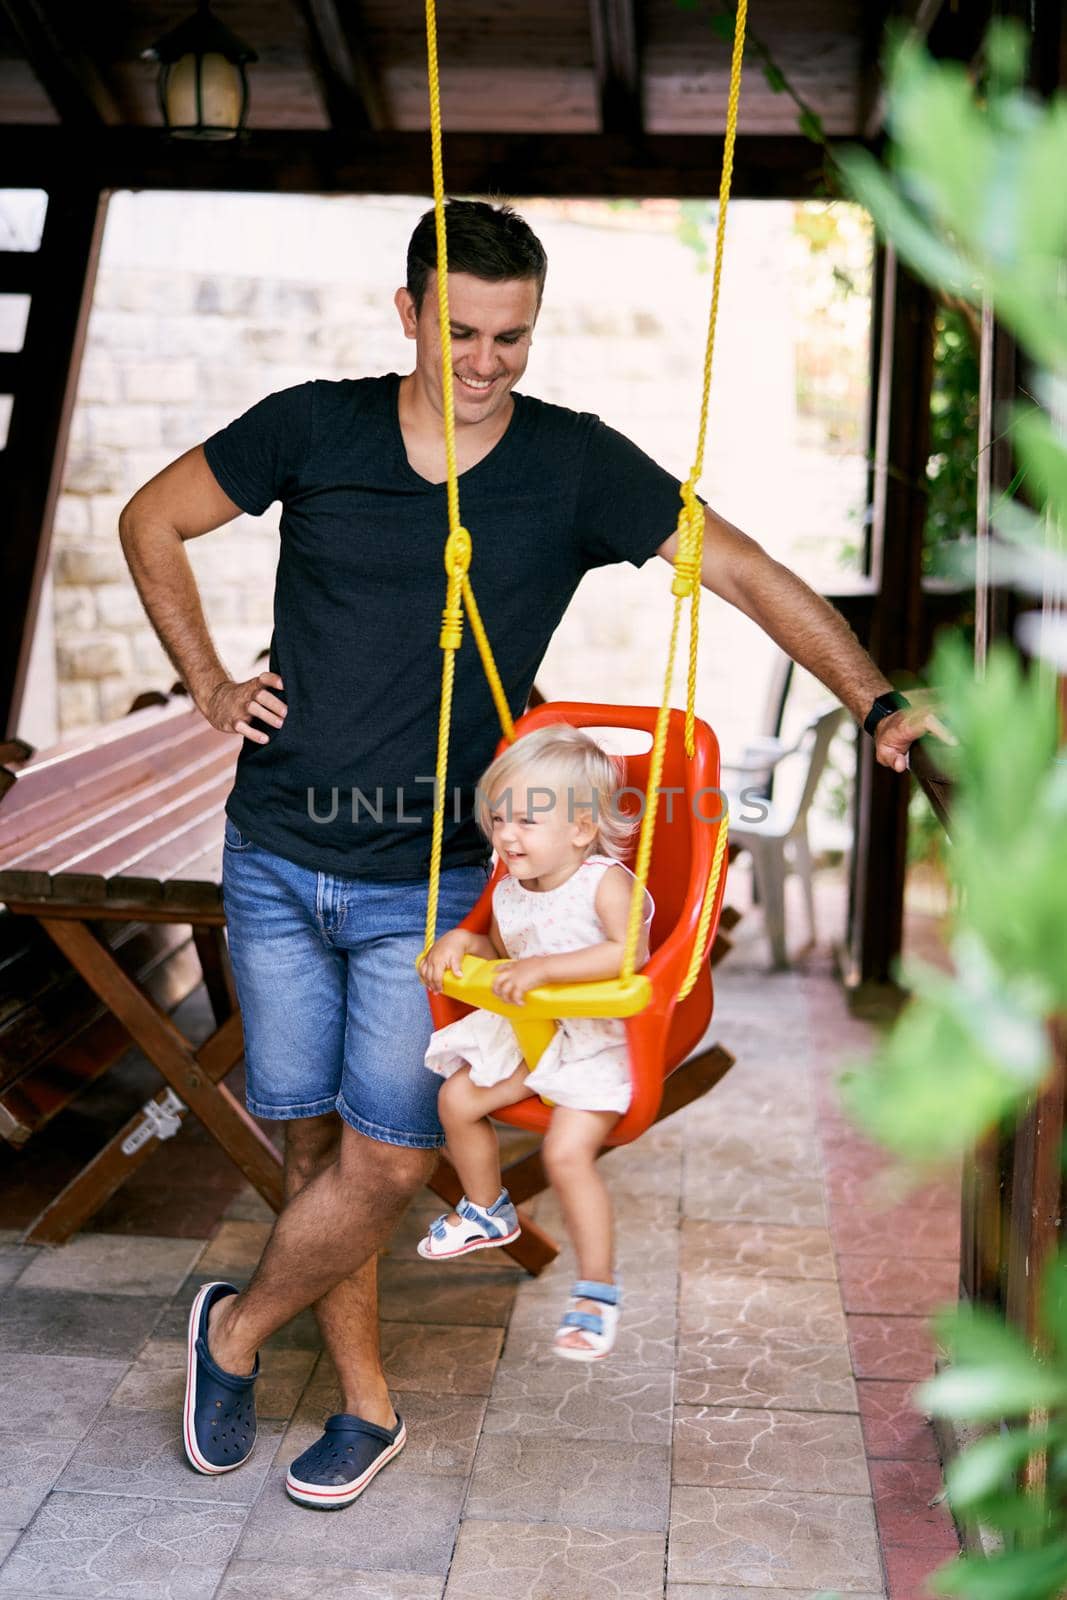 Smiling dad stands near a little girl on a swing in a wooden gazebo. High quality photo